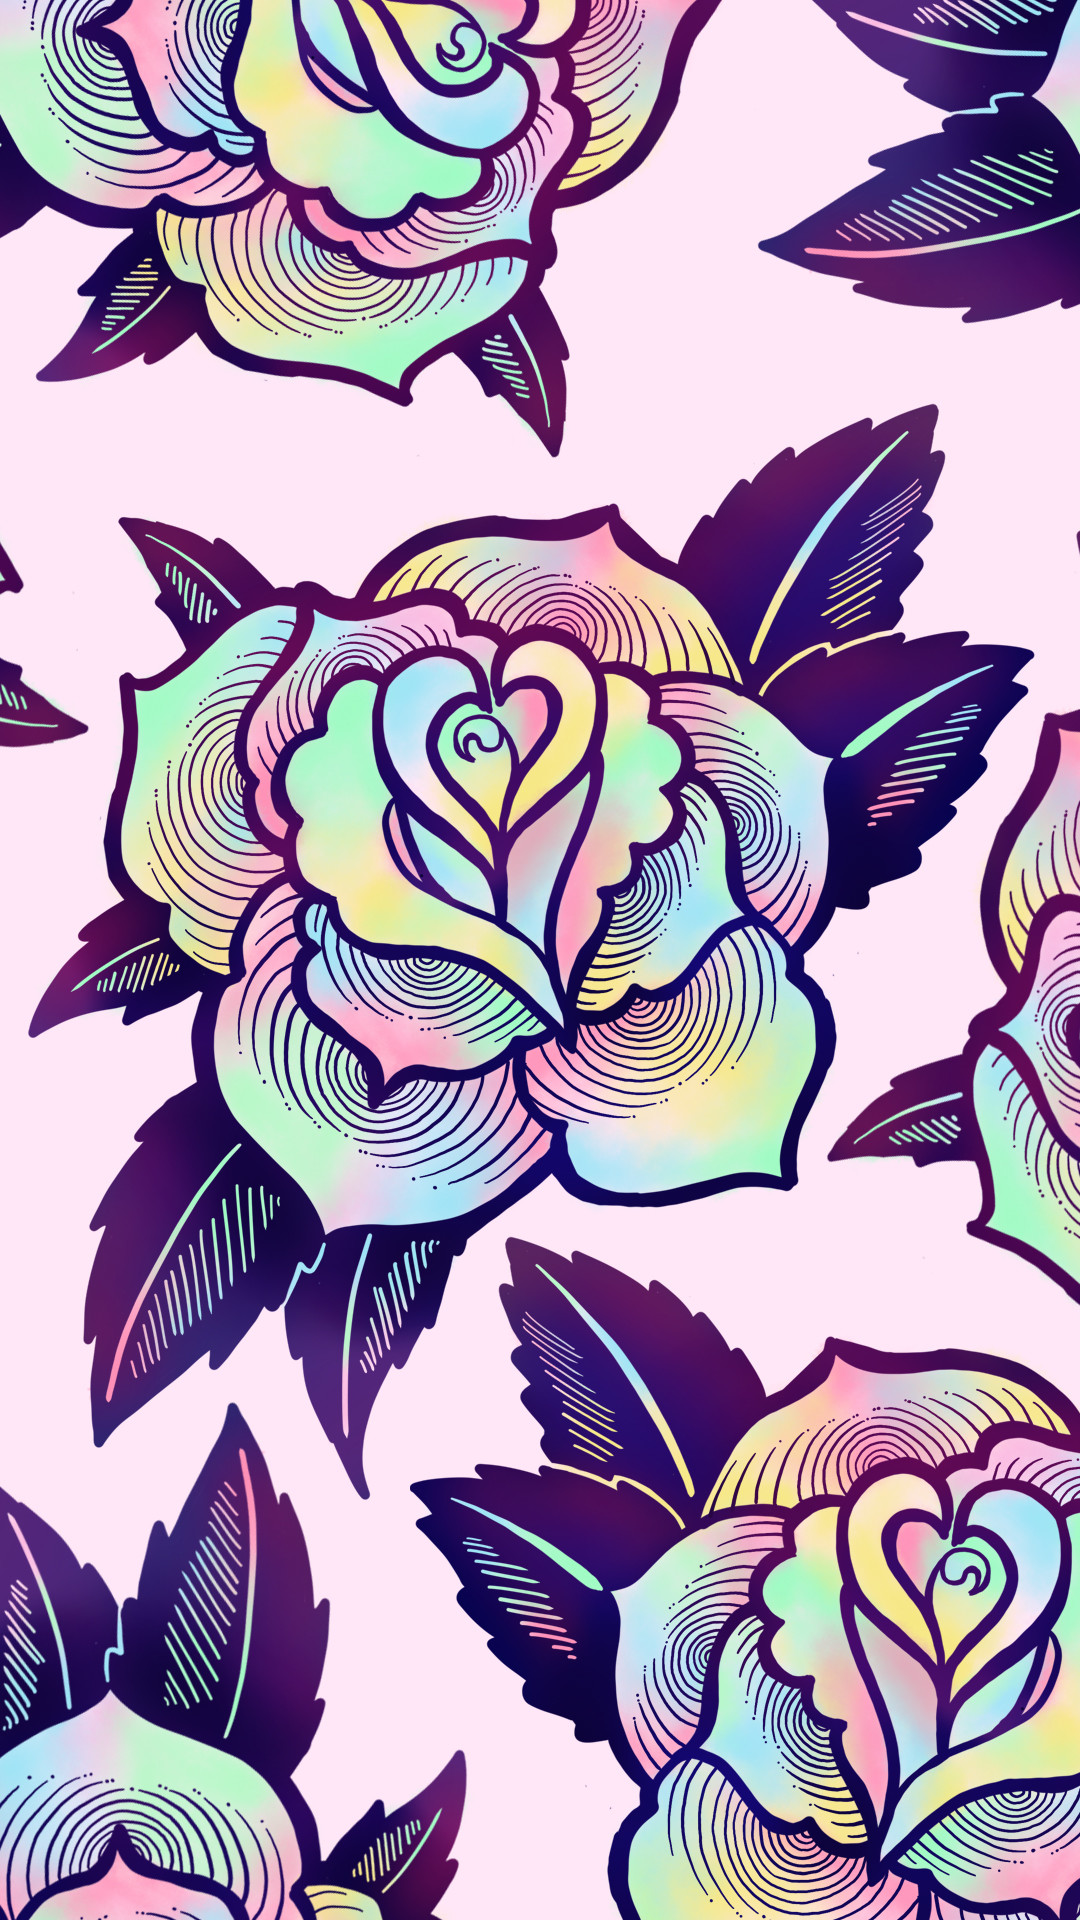 1080x1920 Cute, colorful psychedelic rose wallpaper for your phone or desktop  computer. By Ectogasm